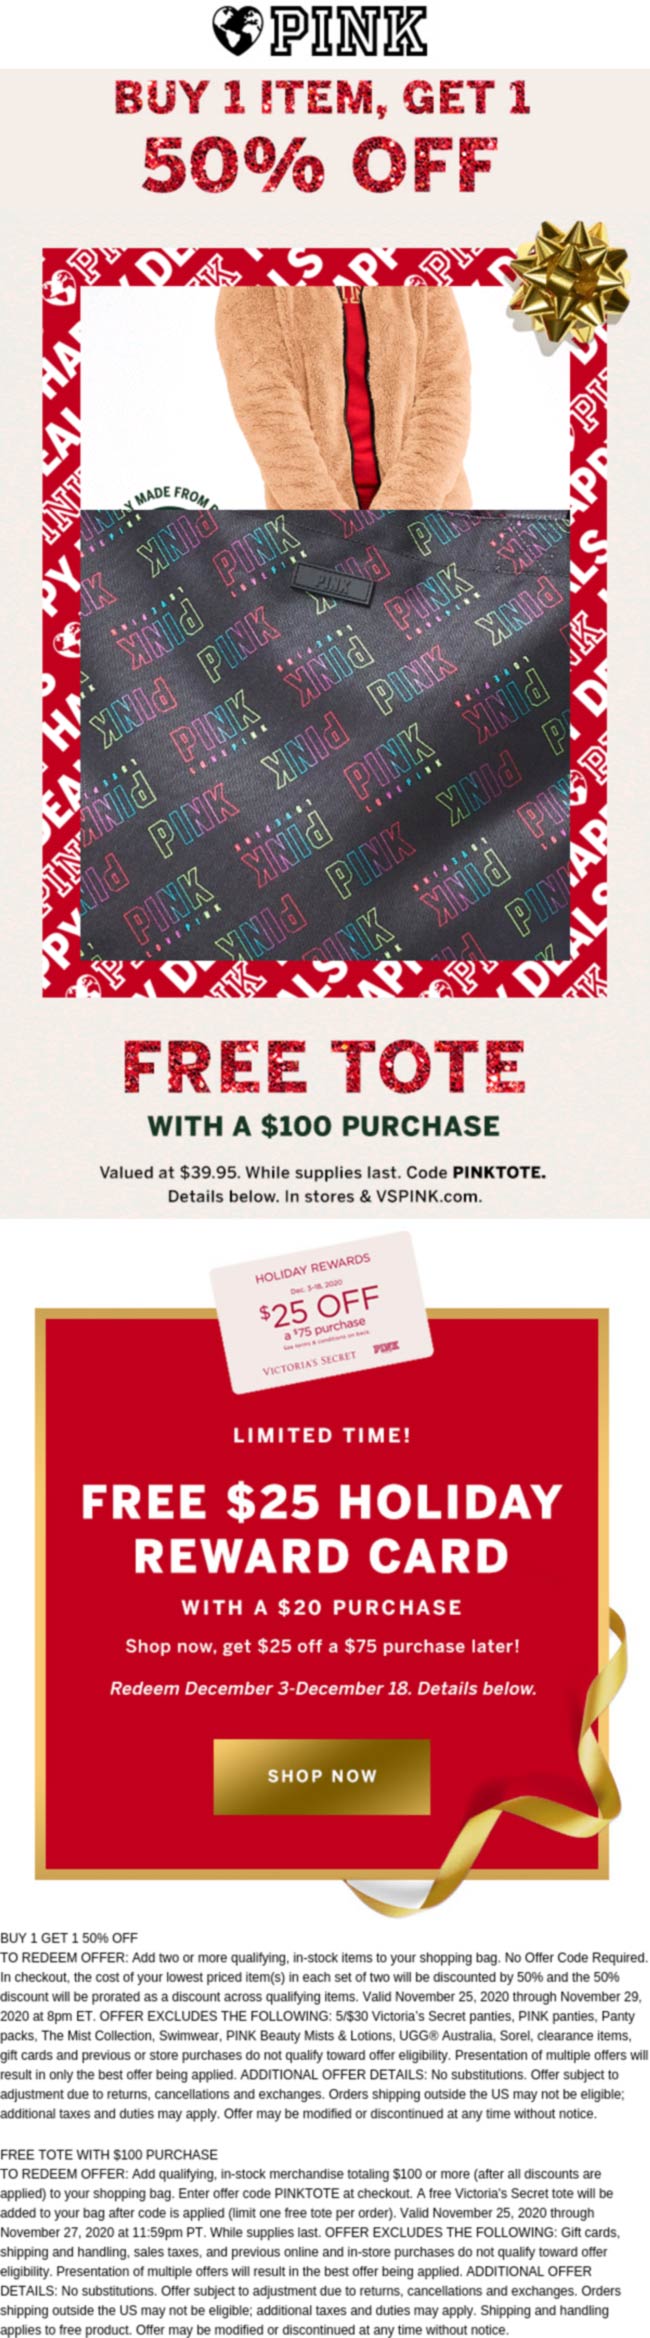 PINK stores Coupon  2nd item 50% off & more at Victorias Secret PINK - also free tote on $100 via promo PINKTOTE #pink 